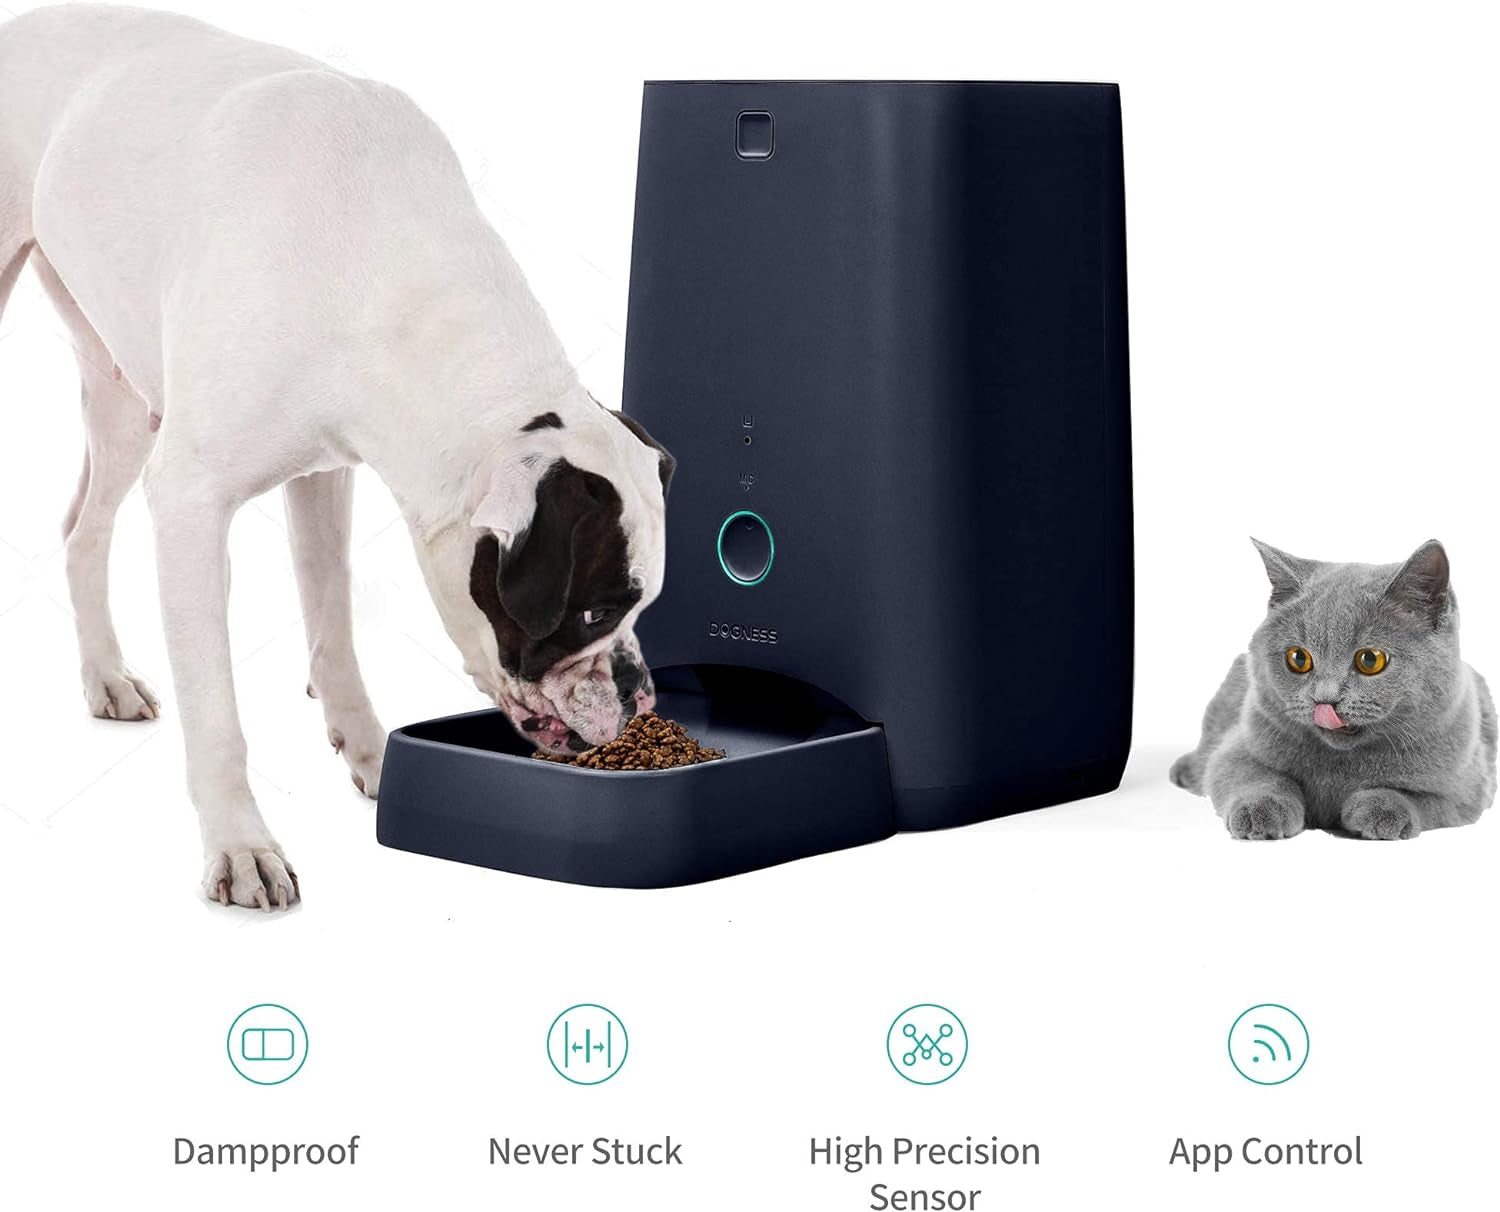 6L Smart Feed Automatic Cat Feeder, Wi-Fi Enabled Pet Feeder for Cat and Small Dog, Smartphone App for Ios and Android, Portion Control, Fresh Lock System Auto Food Dispenser (Dark Blue)